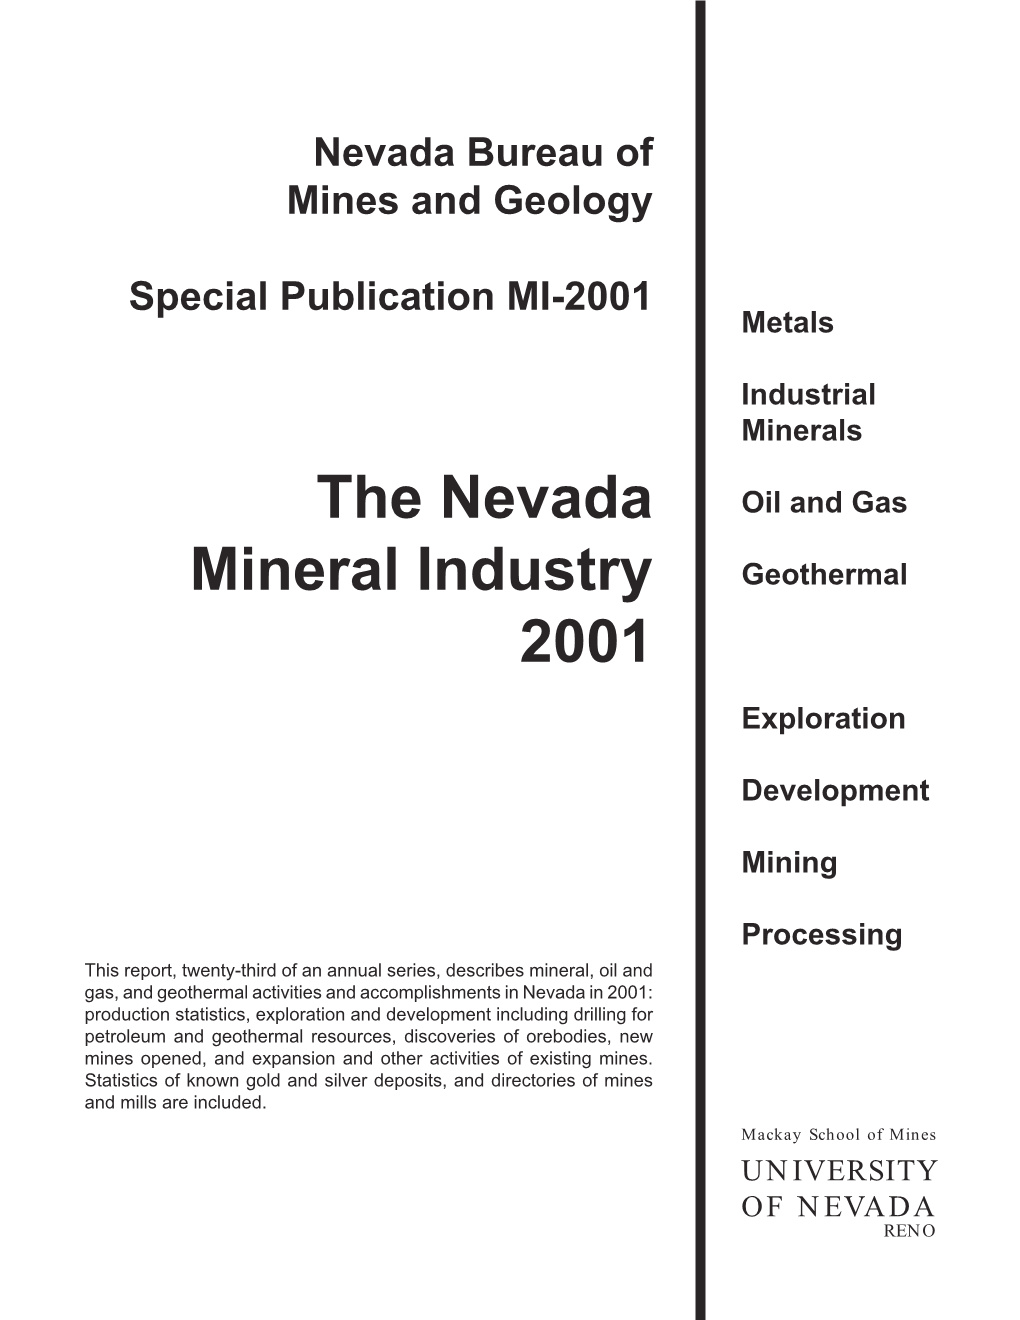 The Nevada Mineral Industry 2001